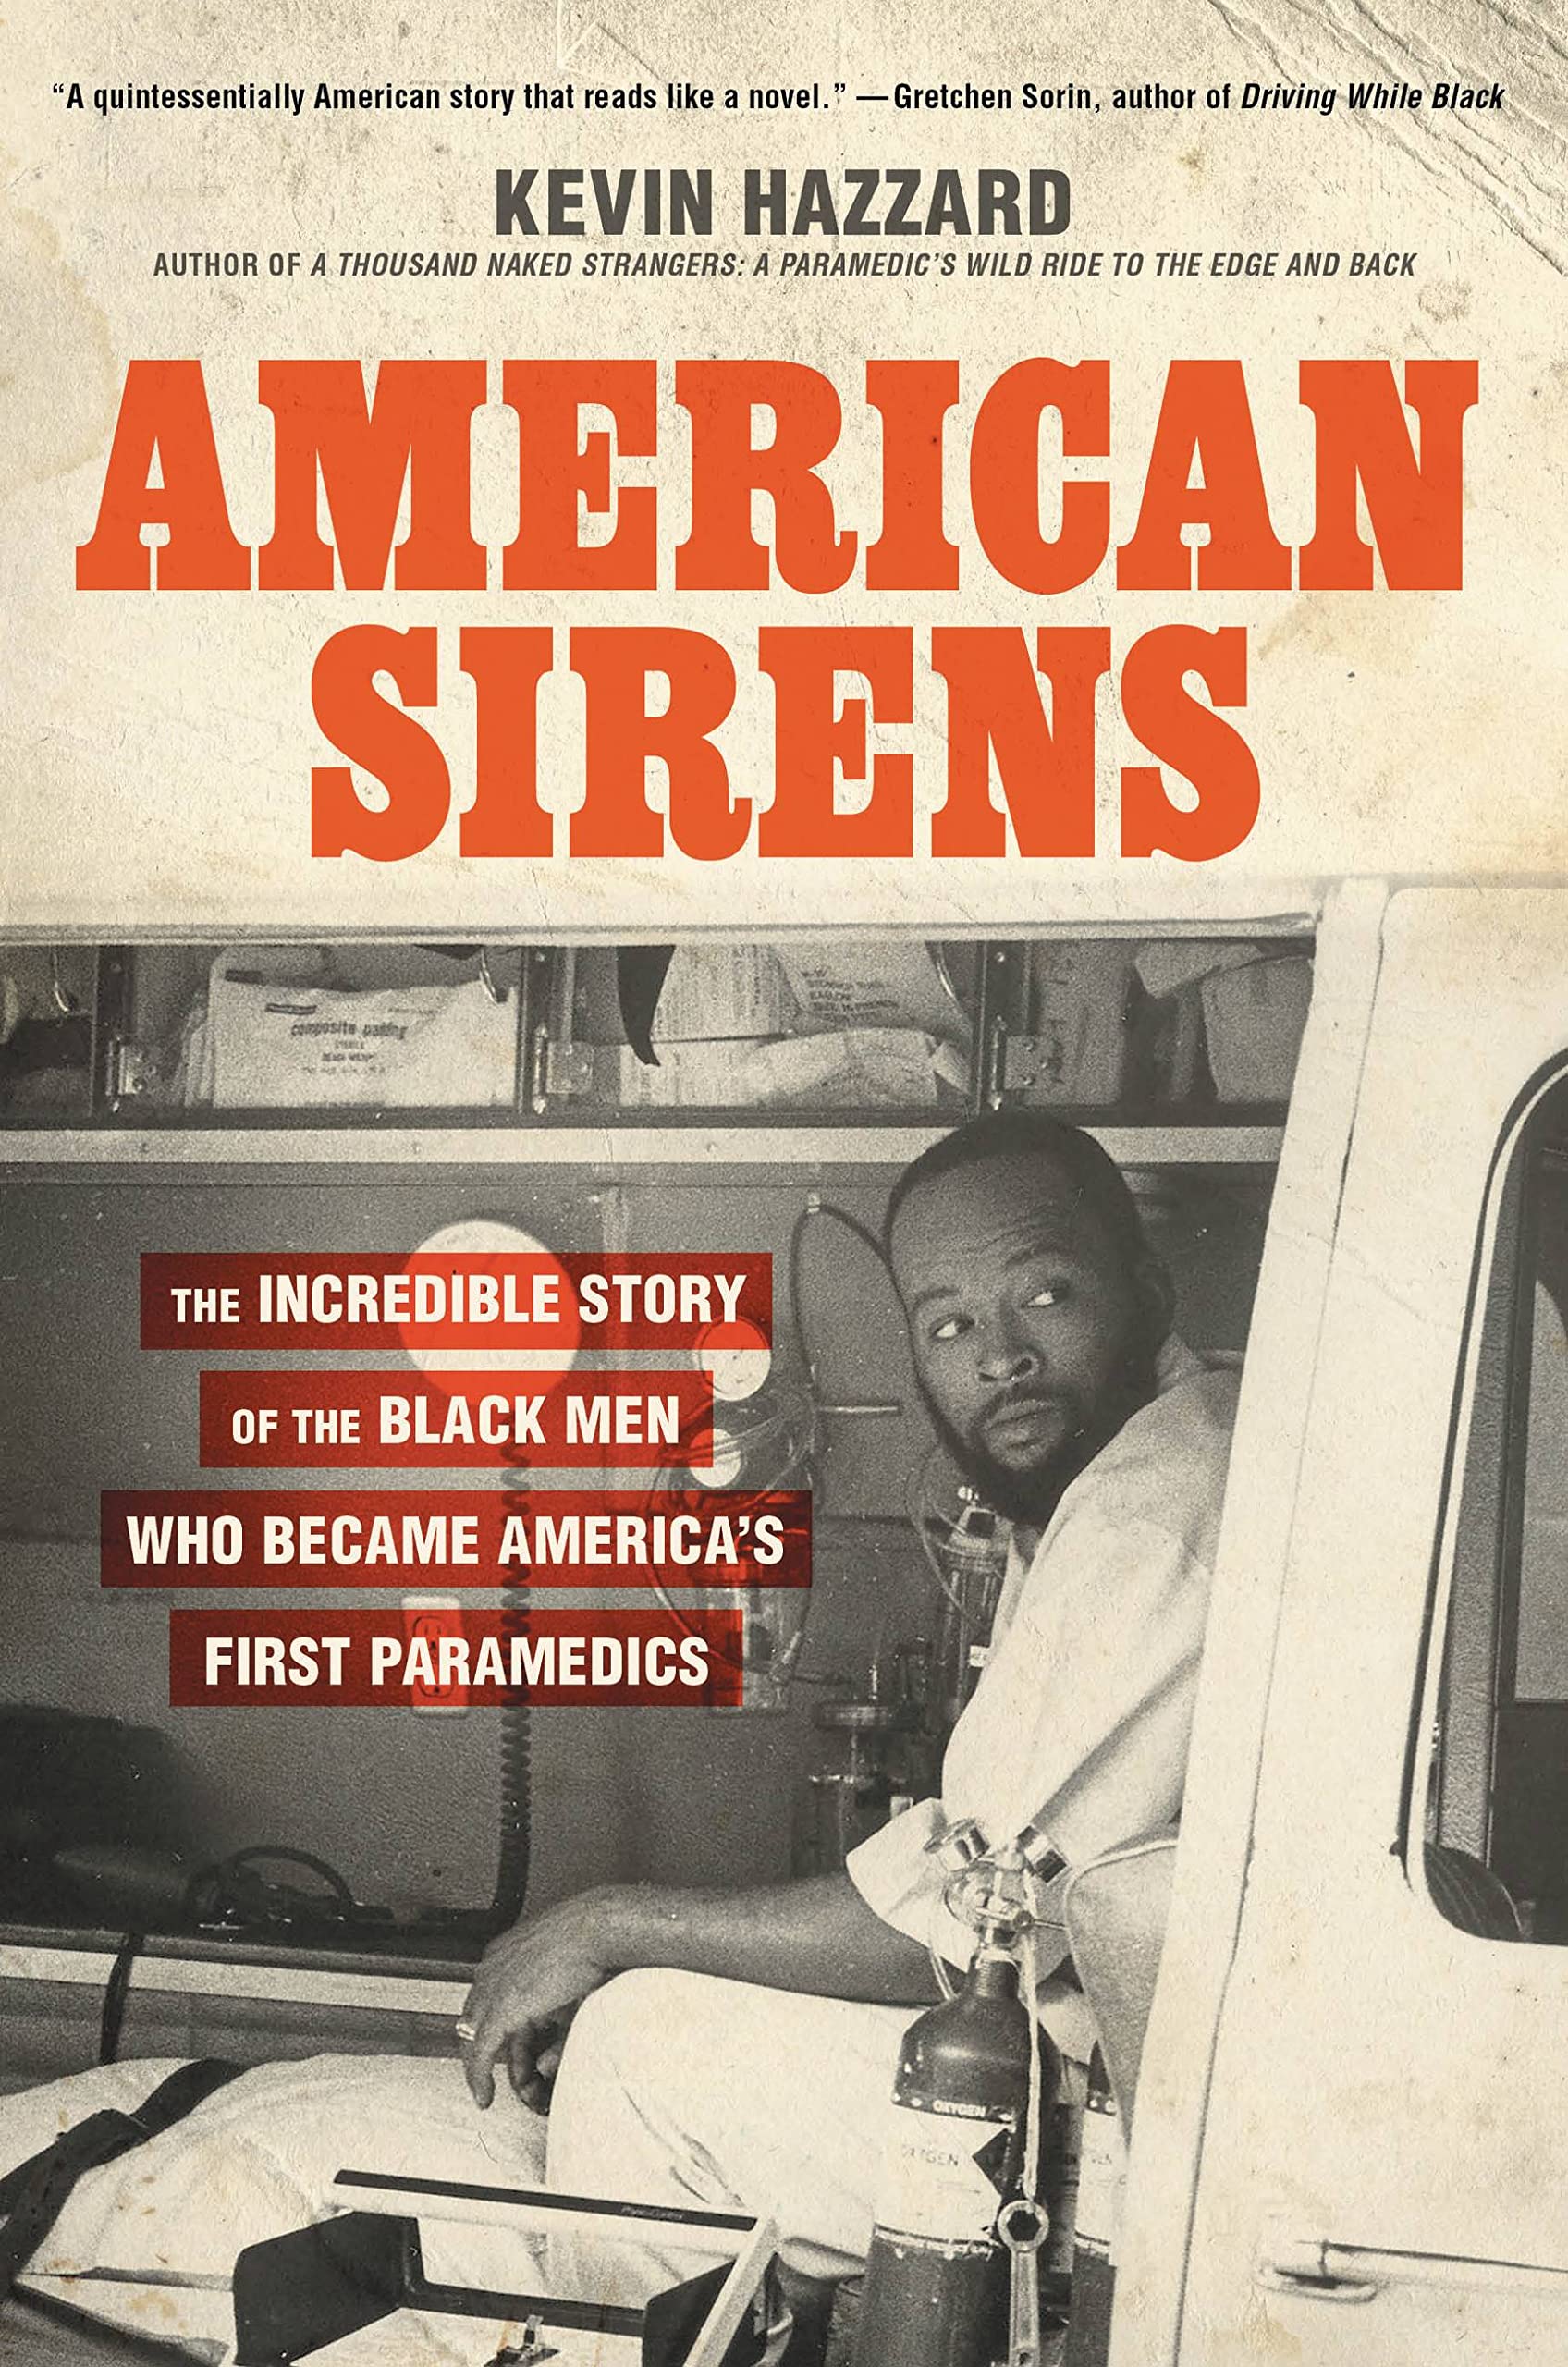 A graphic of the cover of American Sirens: The Incredible Story of the Black Men Who Became America's First Paramedics by Kevin Hazzard